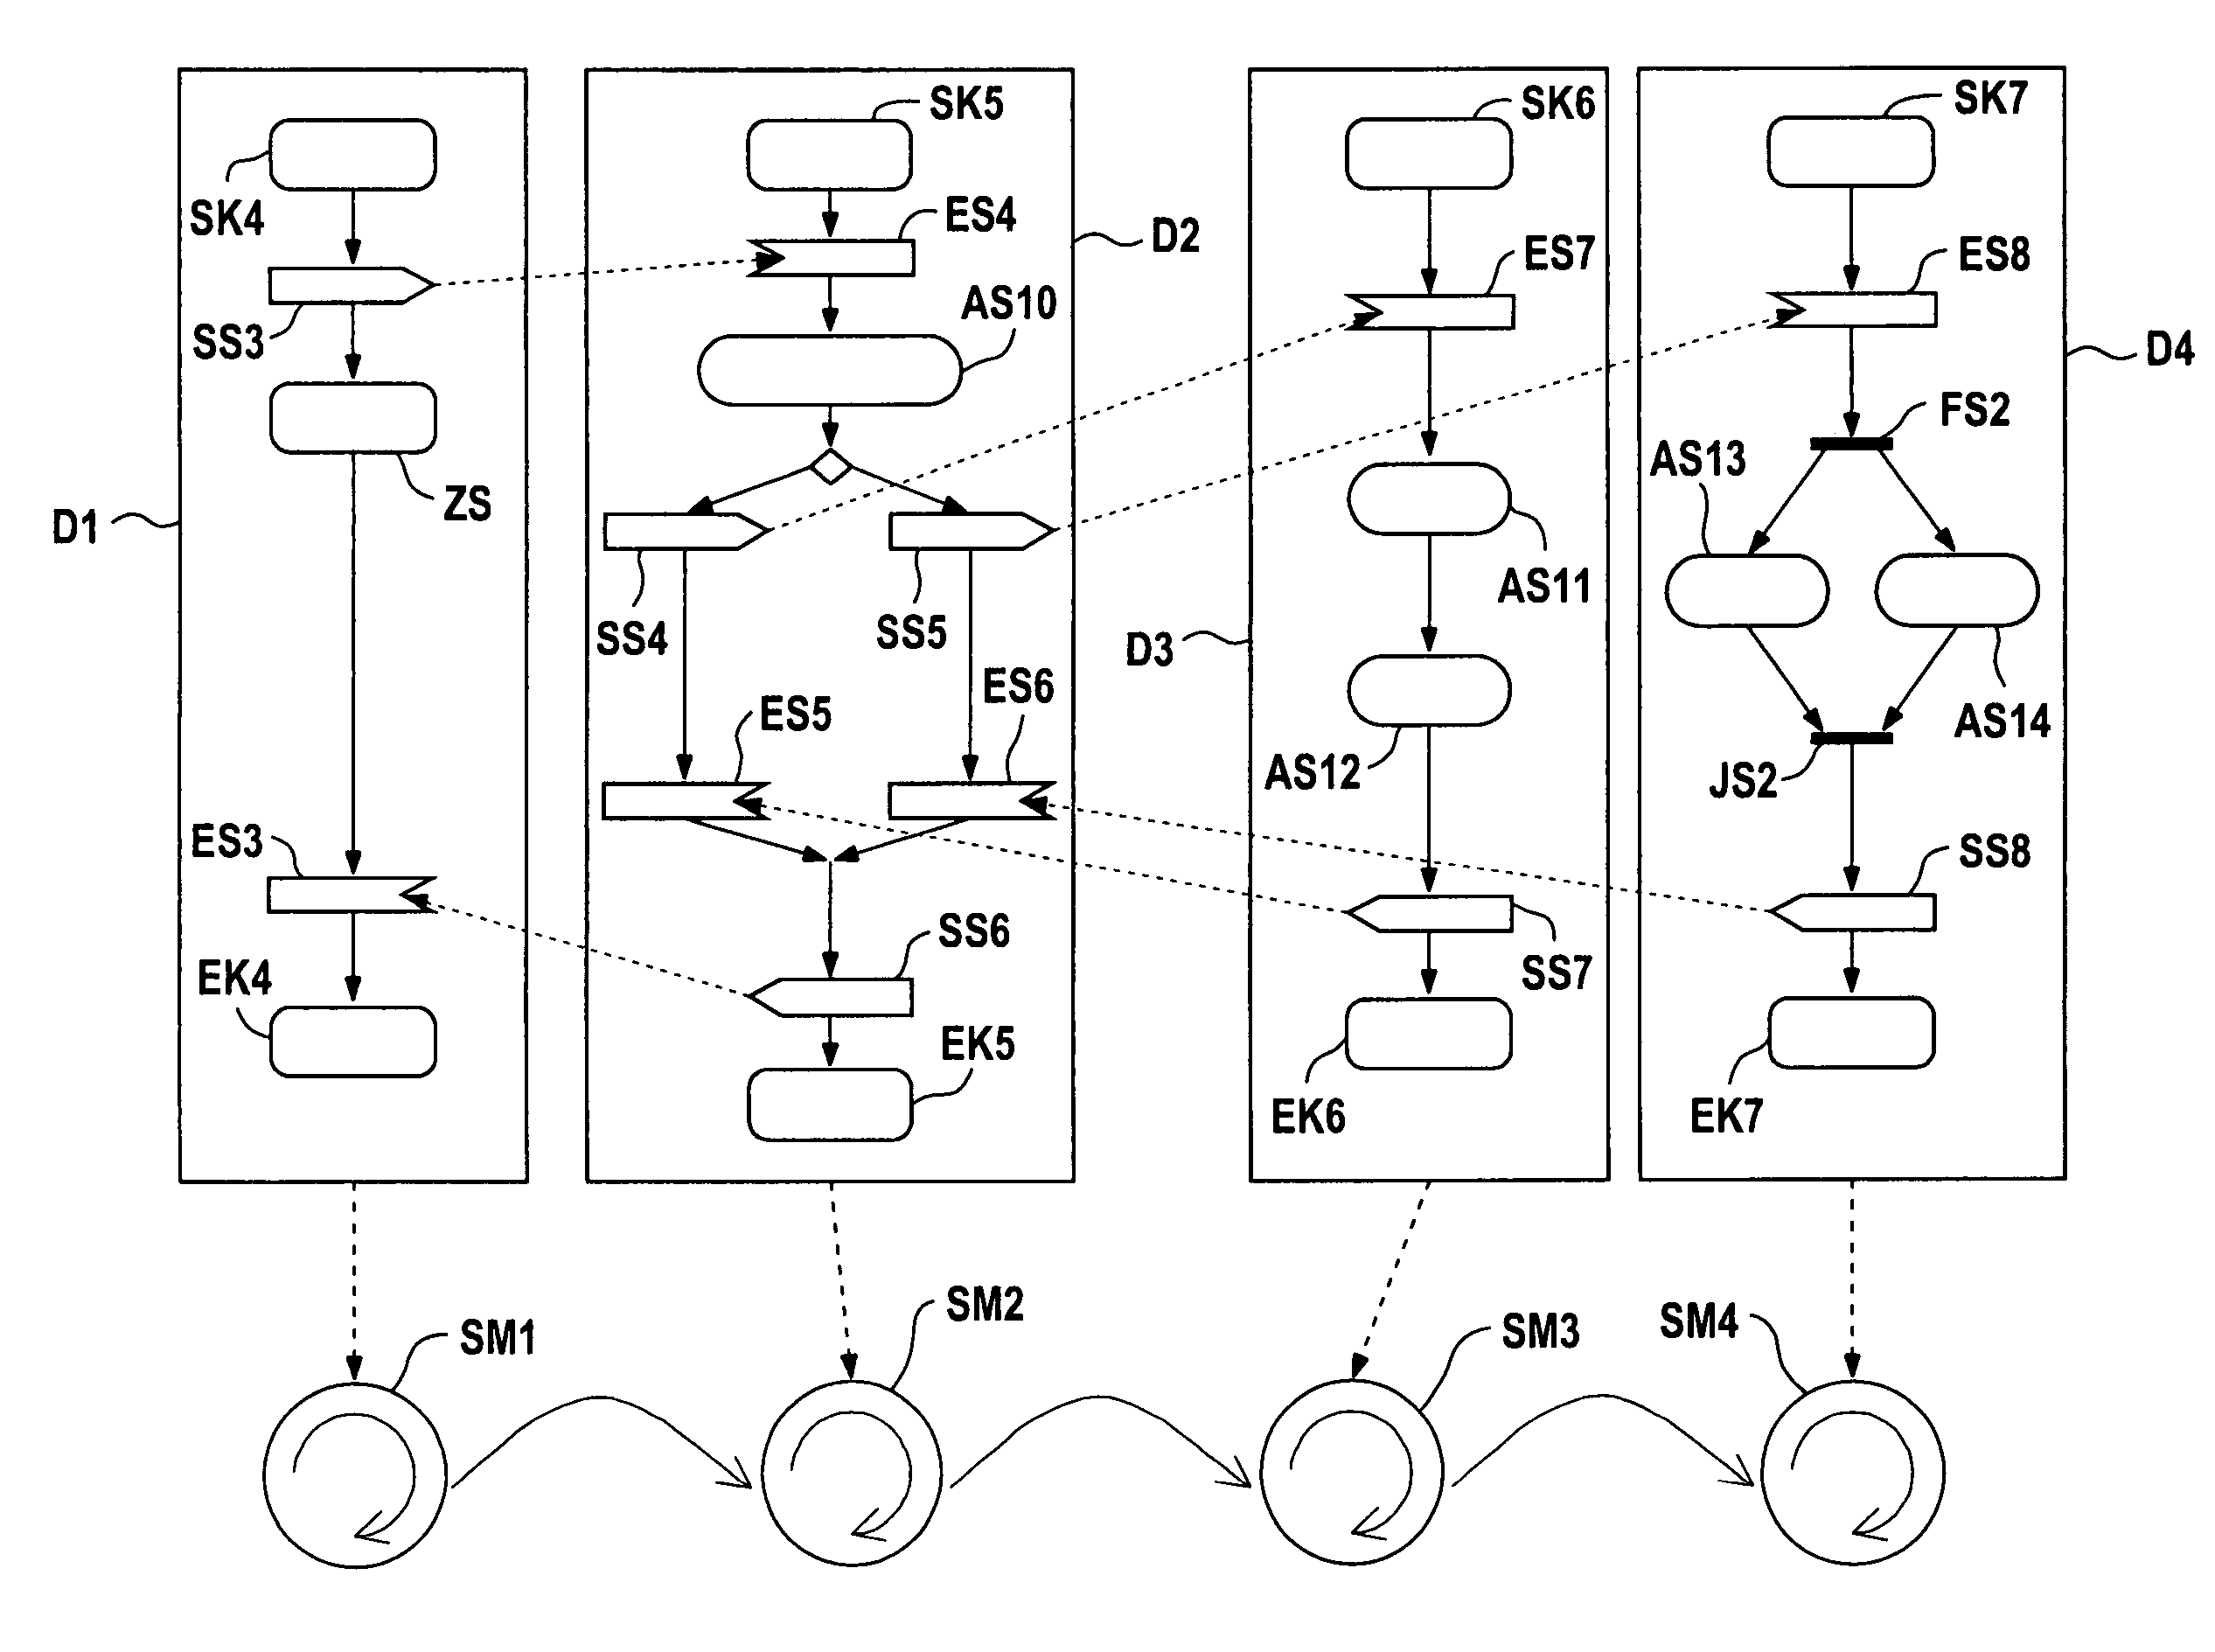 System and method for testing and/or debugging runtime systems for solving MES (manufacturing execution system) problems